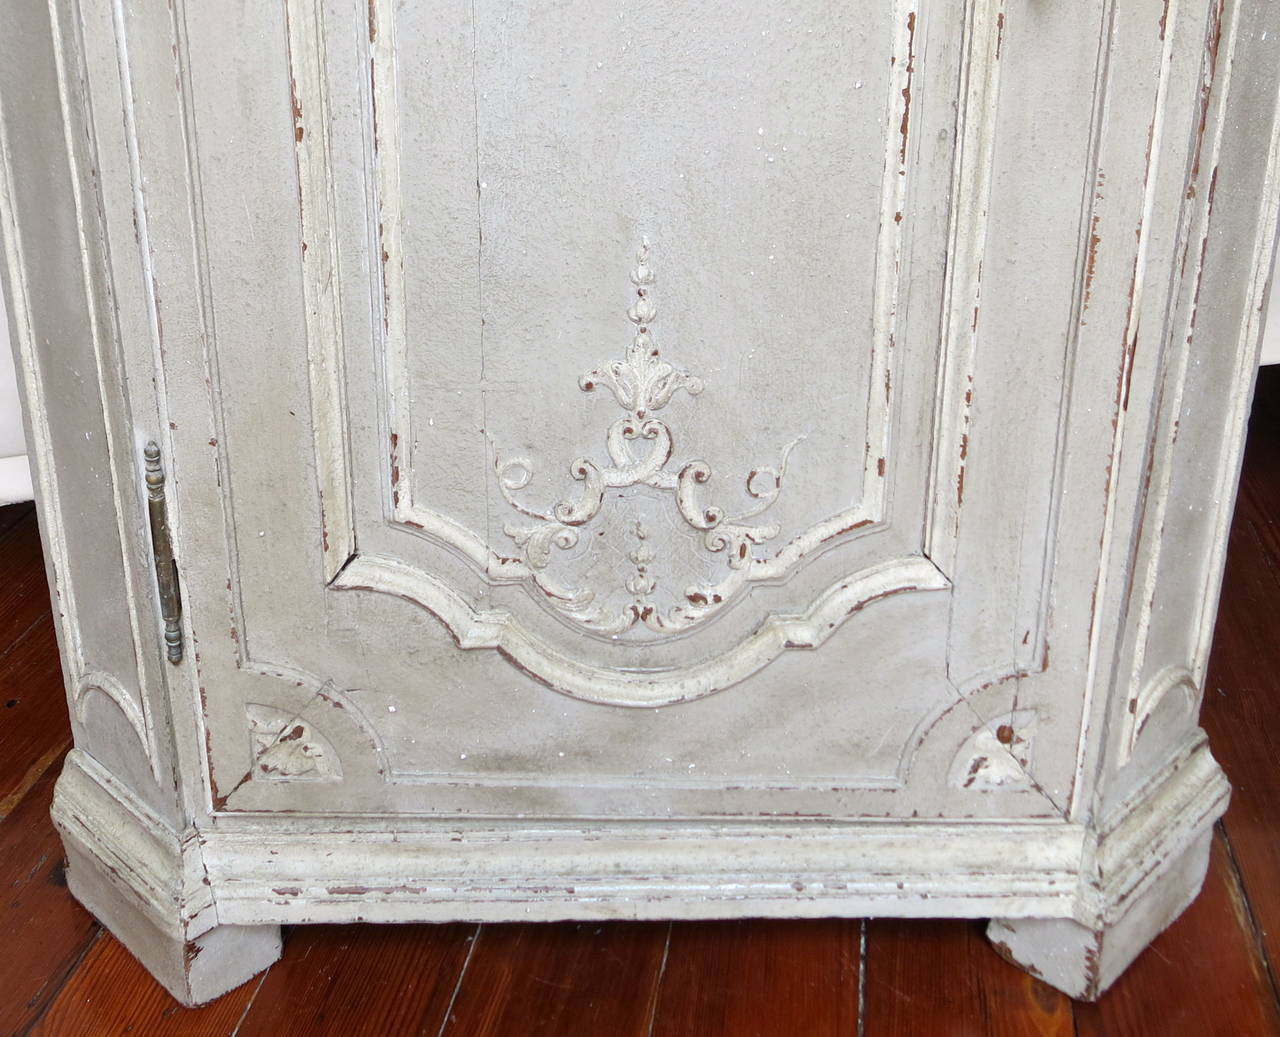 Carved Late 18th Century-Early 19th Century Encoignure (Corner Cabinet)